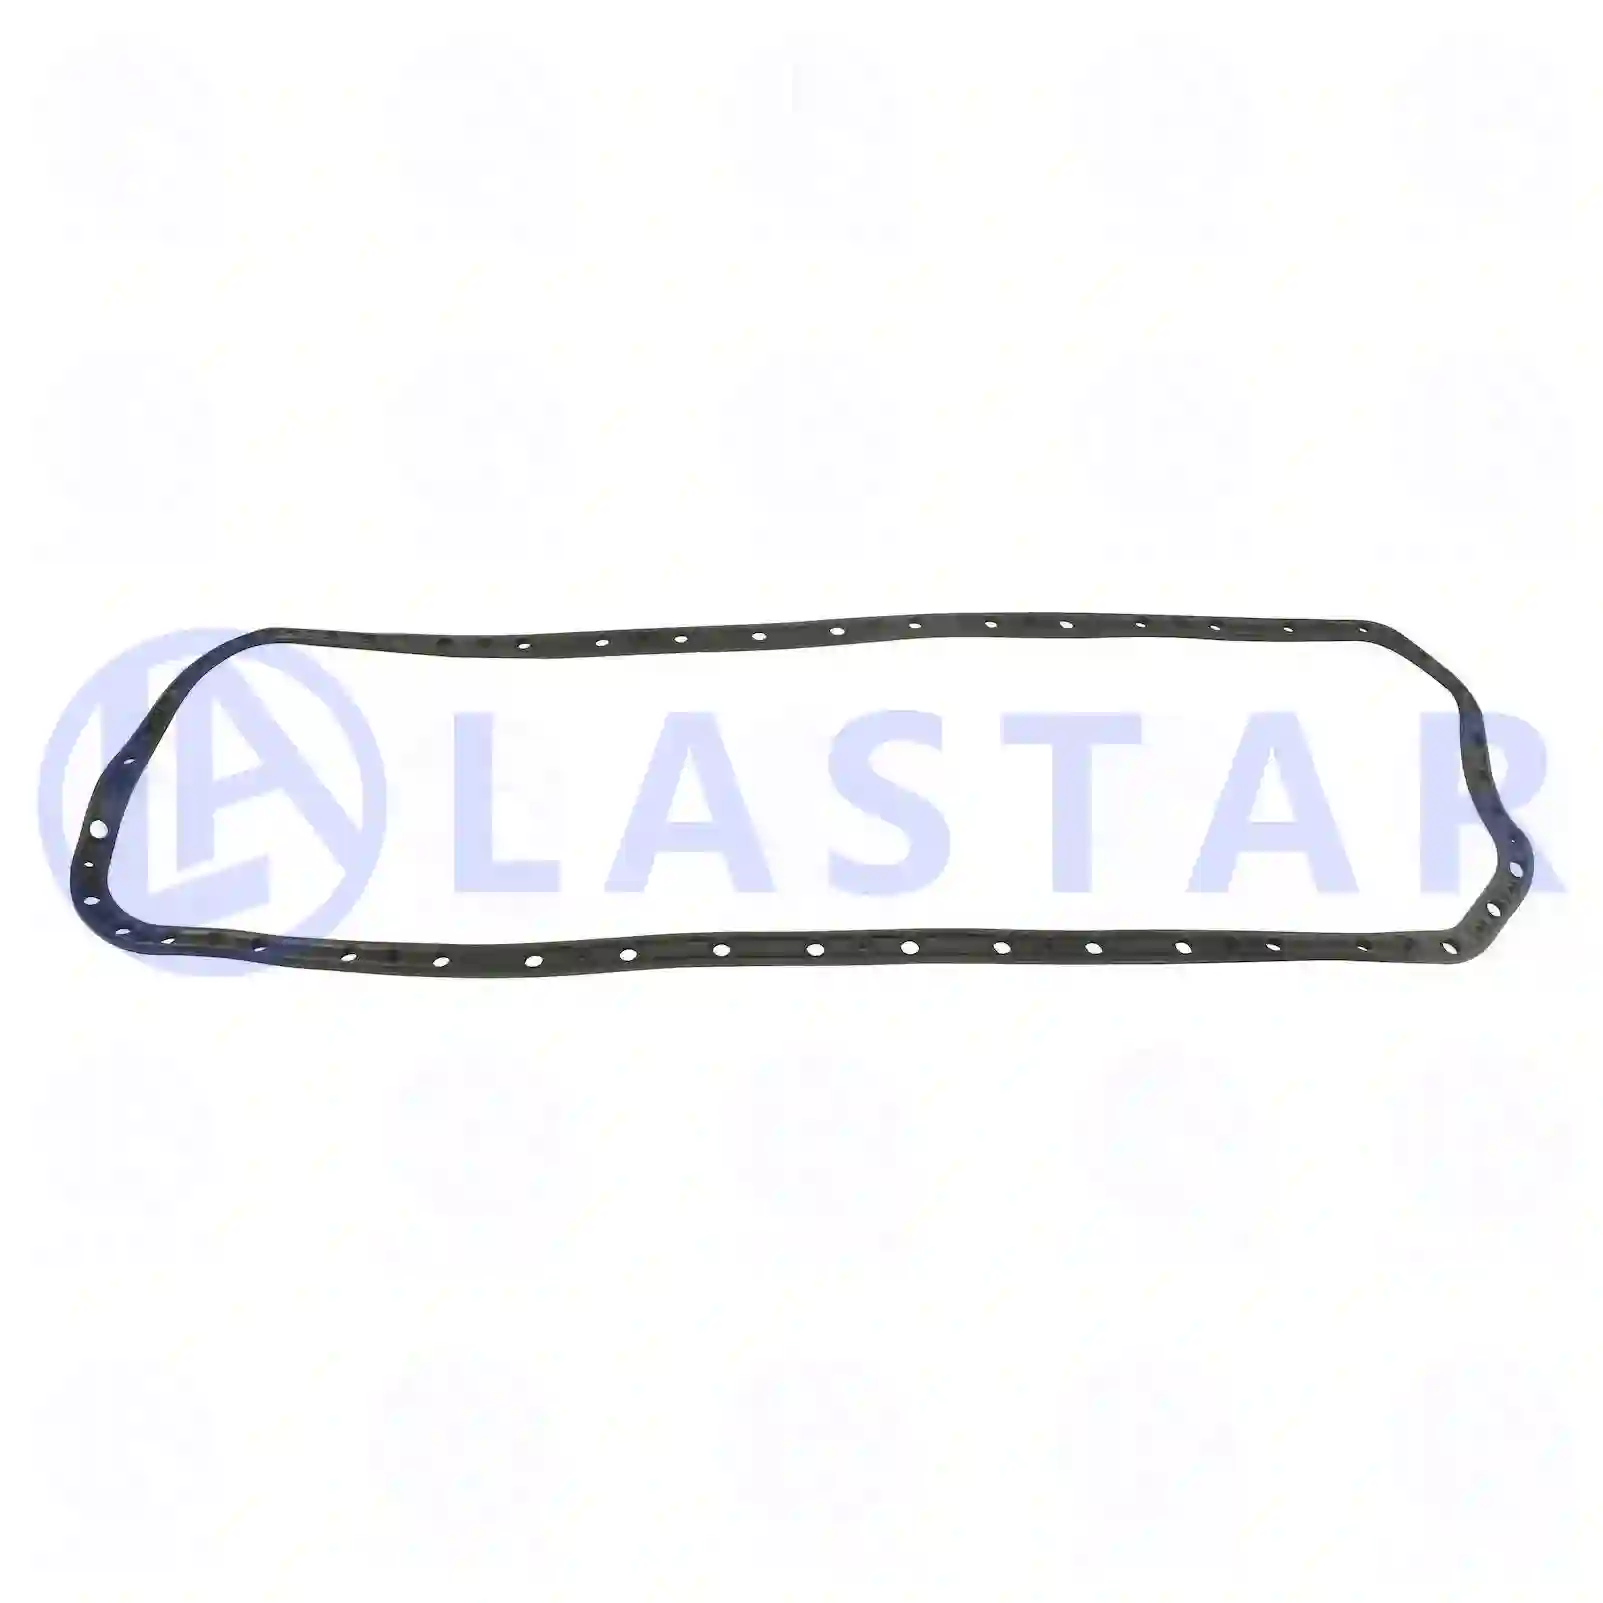 Oil sump gasket, boot, 77700258, 478250, 479484 ||  77700258 Lastar Spare Part | Truck Spare Parts, Auotomotive Spare Parts Oil sump gasket, boot, 77700258, 478250, 479484 ||  77700258 Lastar Spare Part | Truck Spare Parts, Auotomotive Spare Parts